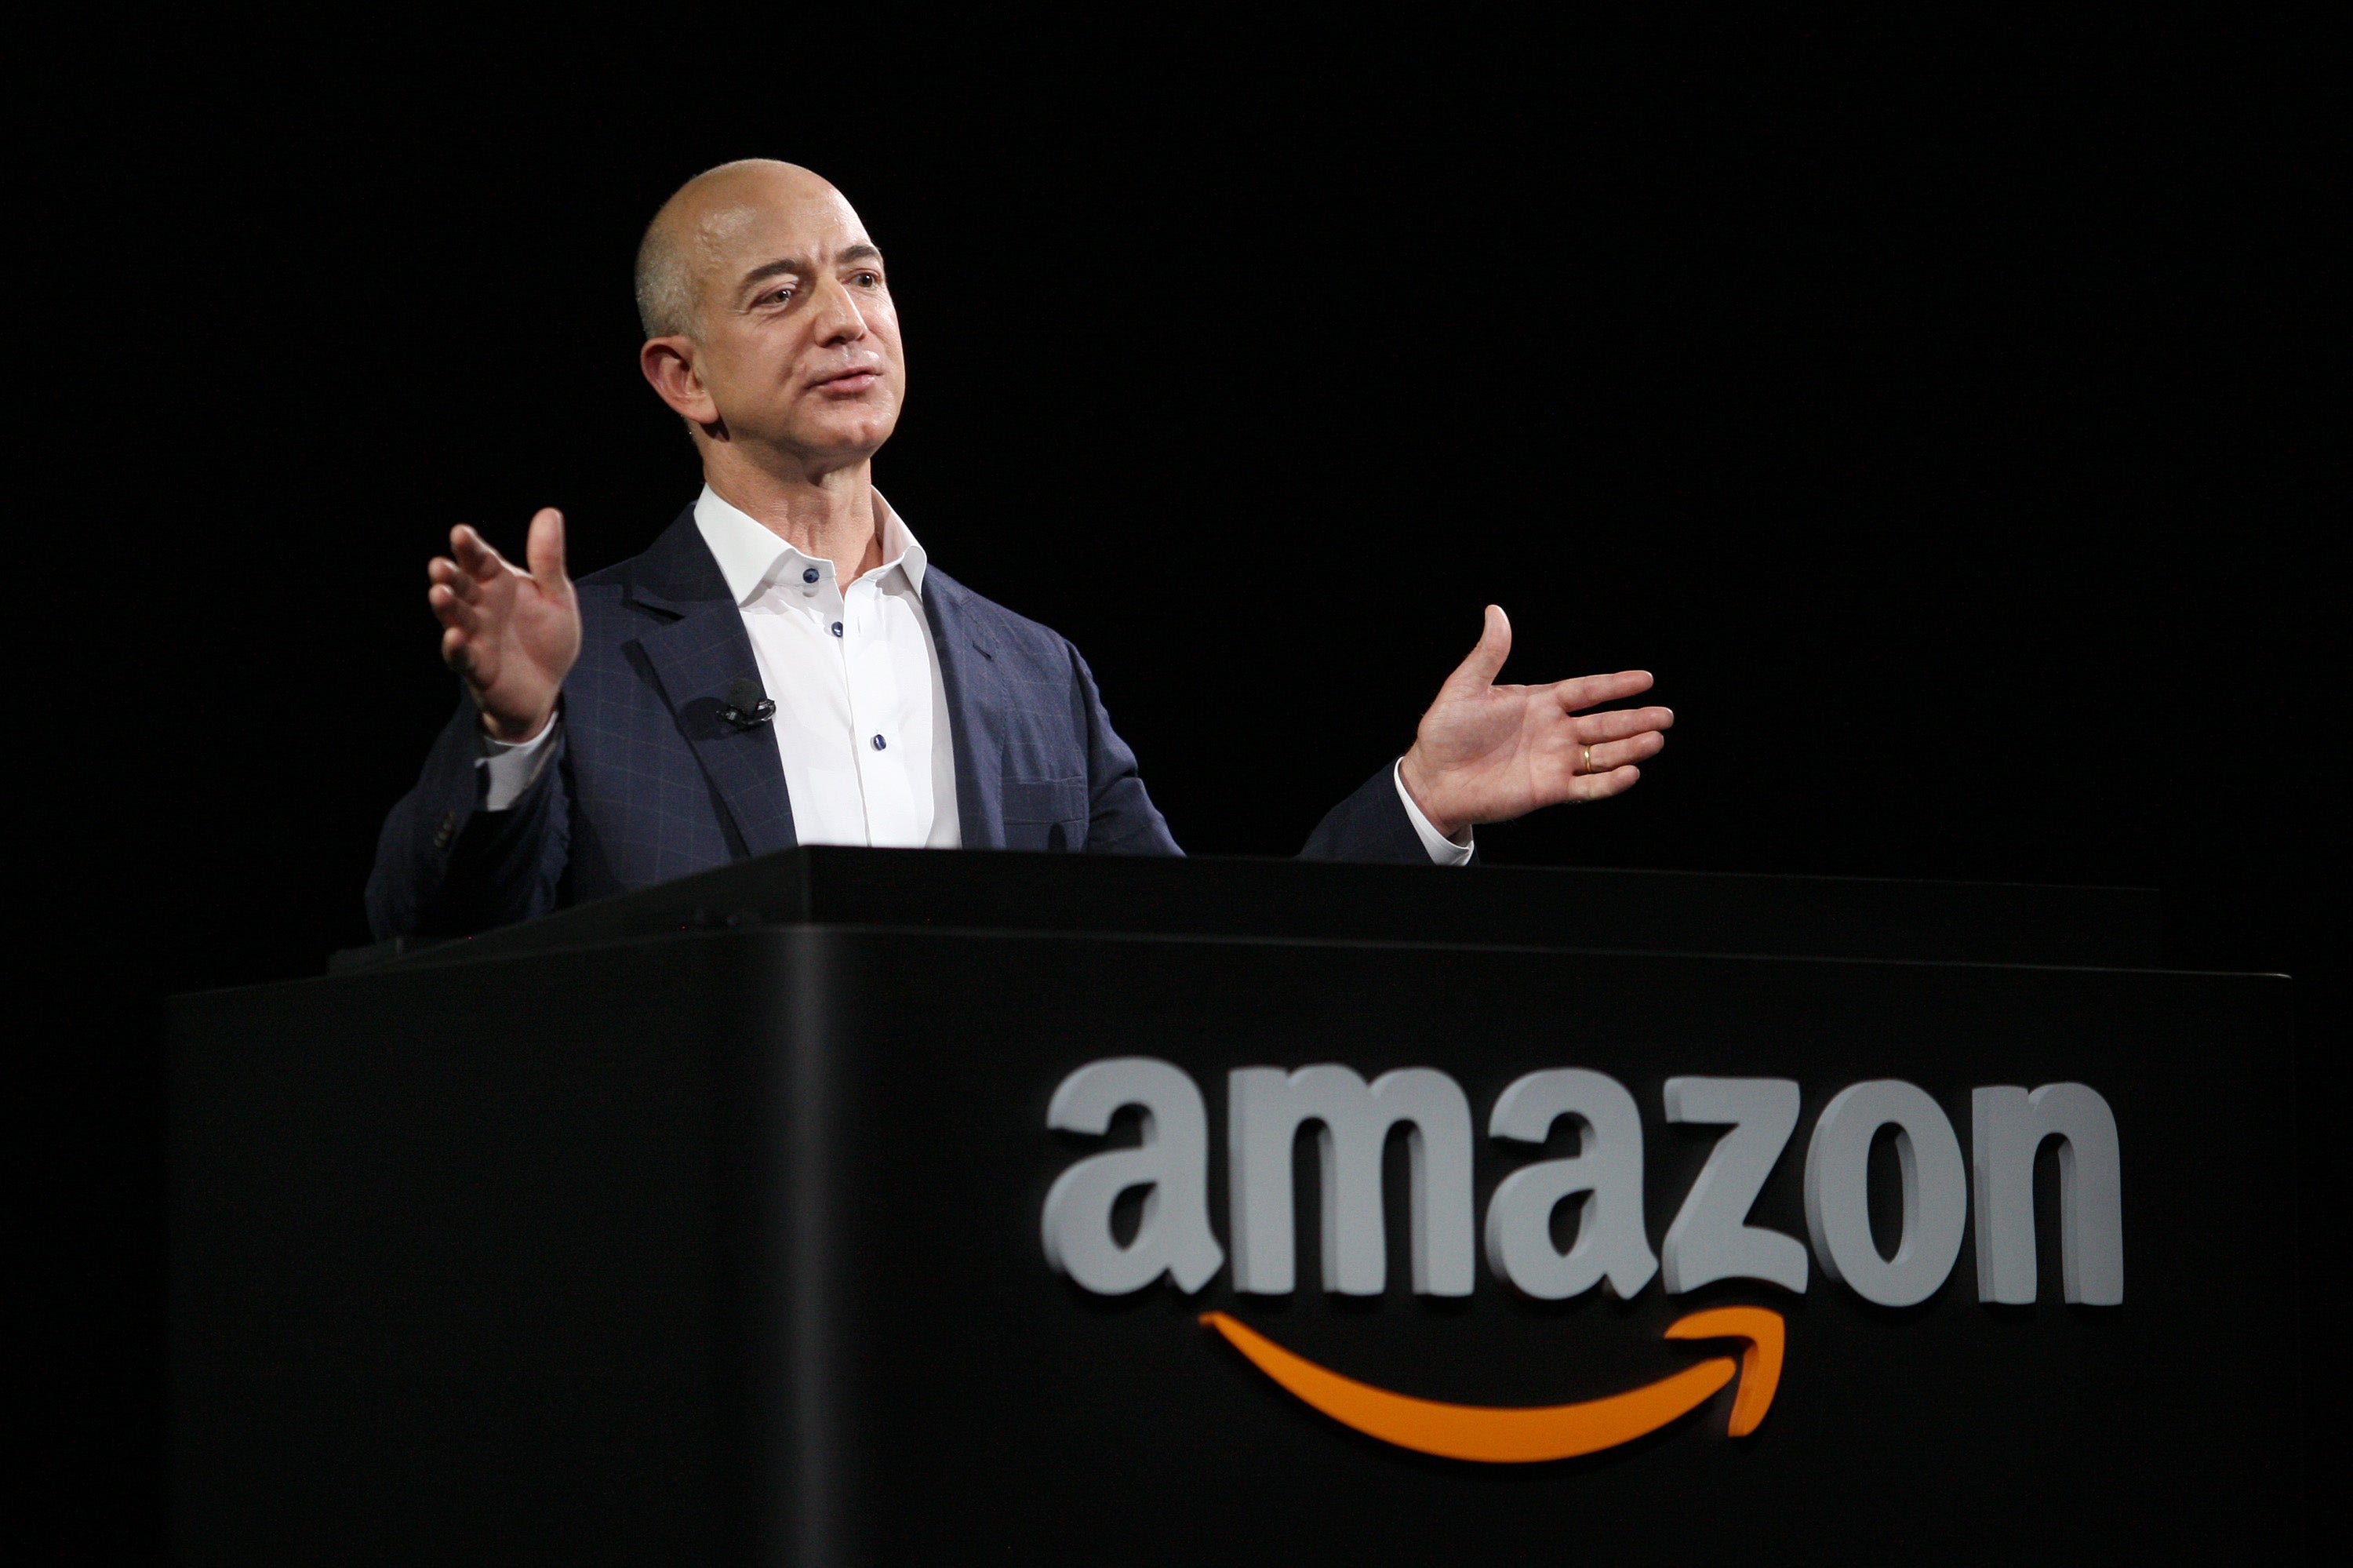 Mr Bezos briefly became the world's richest man on Thursday, overtaking Microsoft co-founder Bill Gates